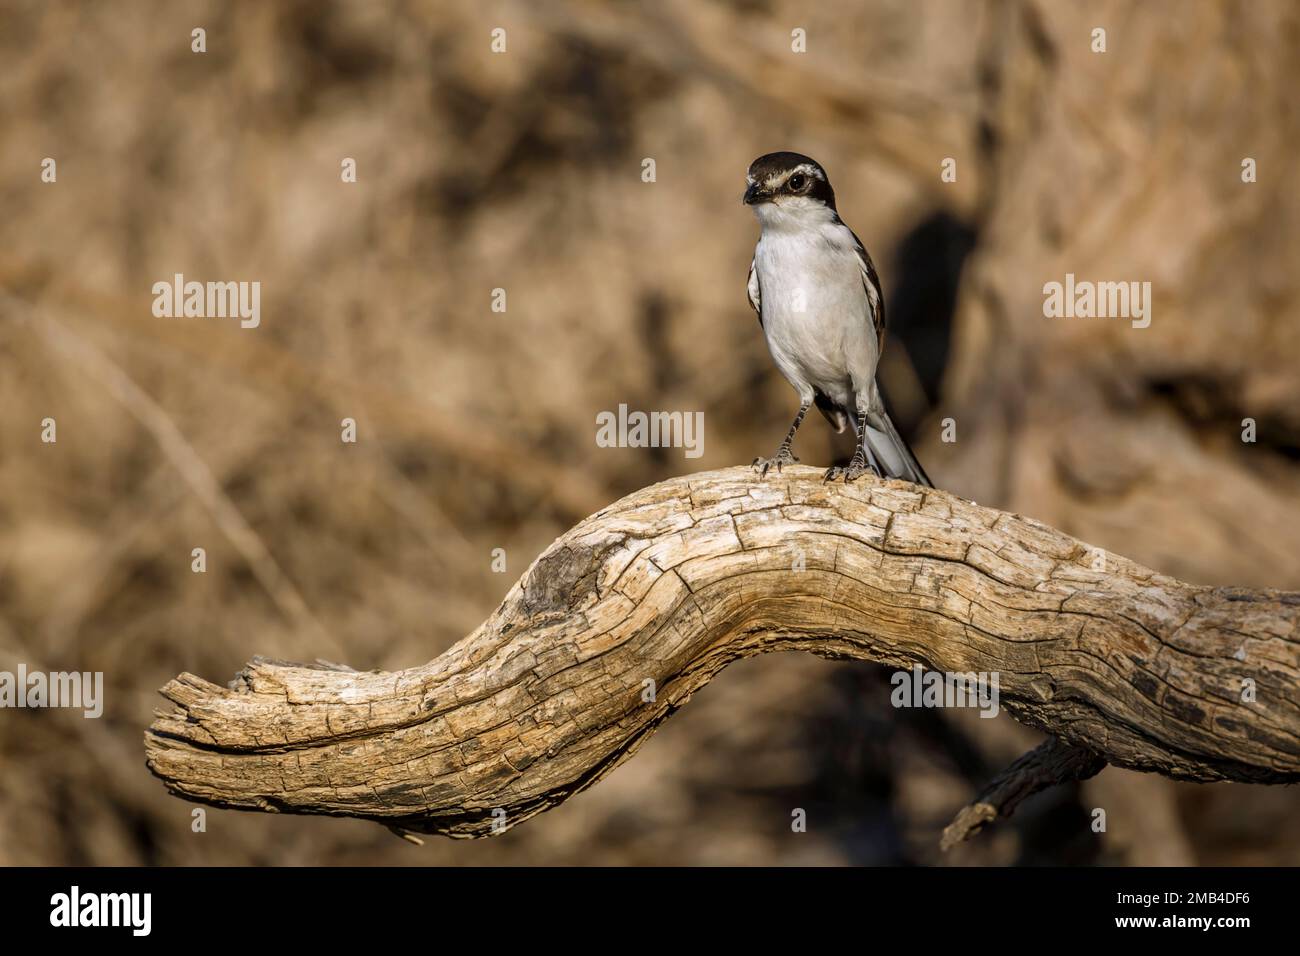 White browed Sparrow Weaver standing on a log front view in Kgalagadi transfrontier park, South Africa; specie Plocepasser mahali family of Ploceidae Stock Photo